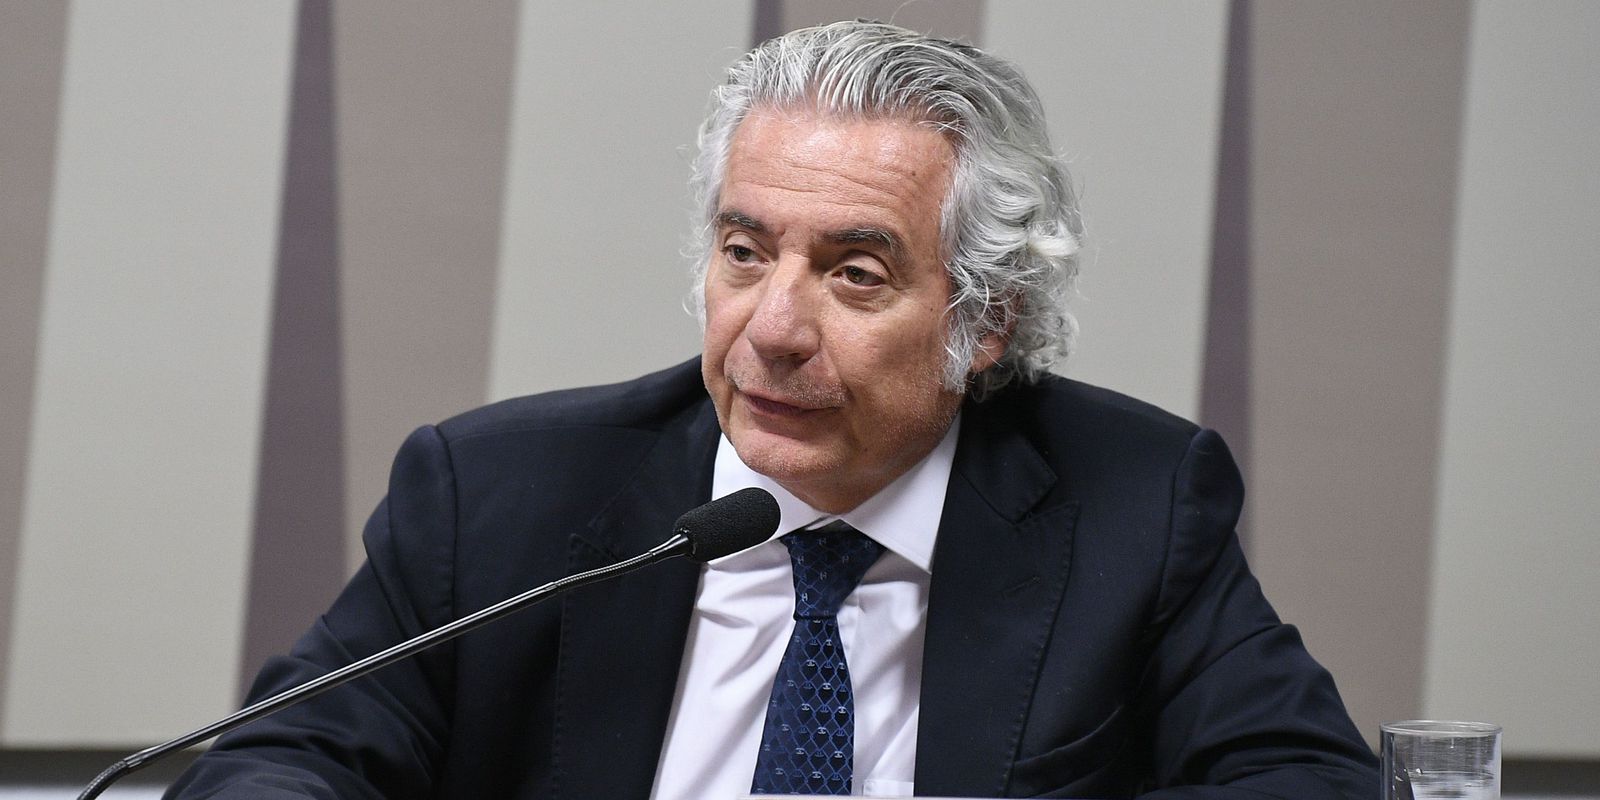 Adriano Pires gives up his nomination for the presidency of Petrobras